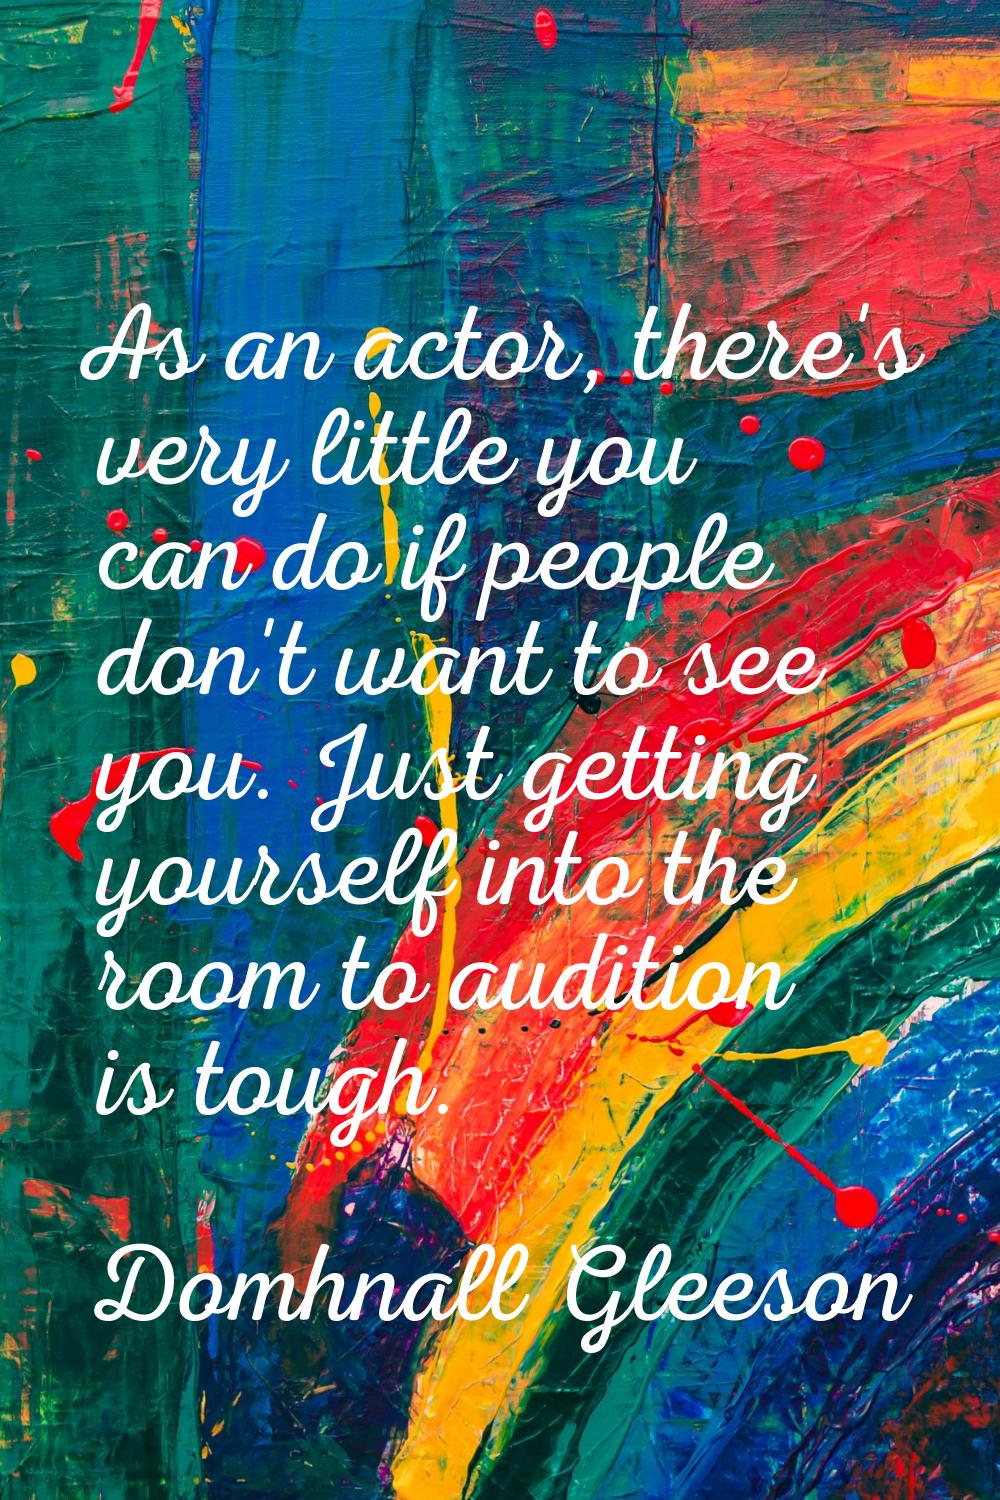 As an actor, there's very little you can do if people don't want to see you. Just getting yourself 